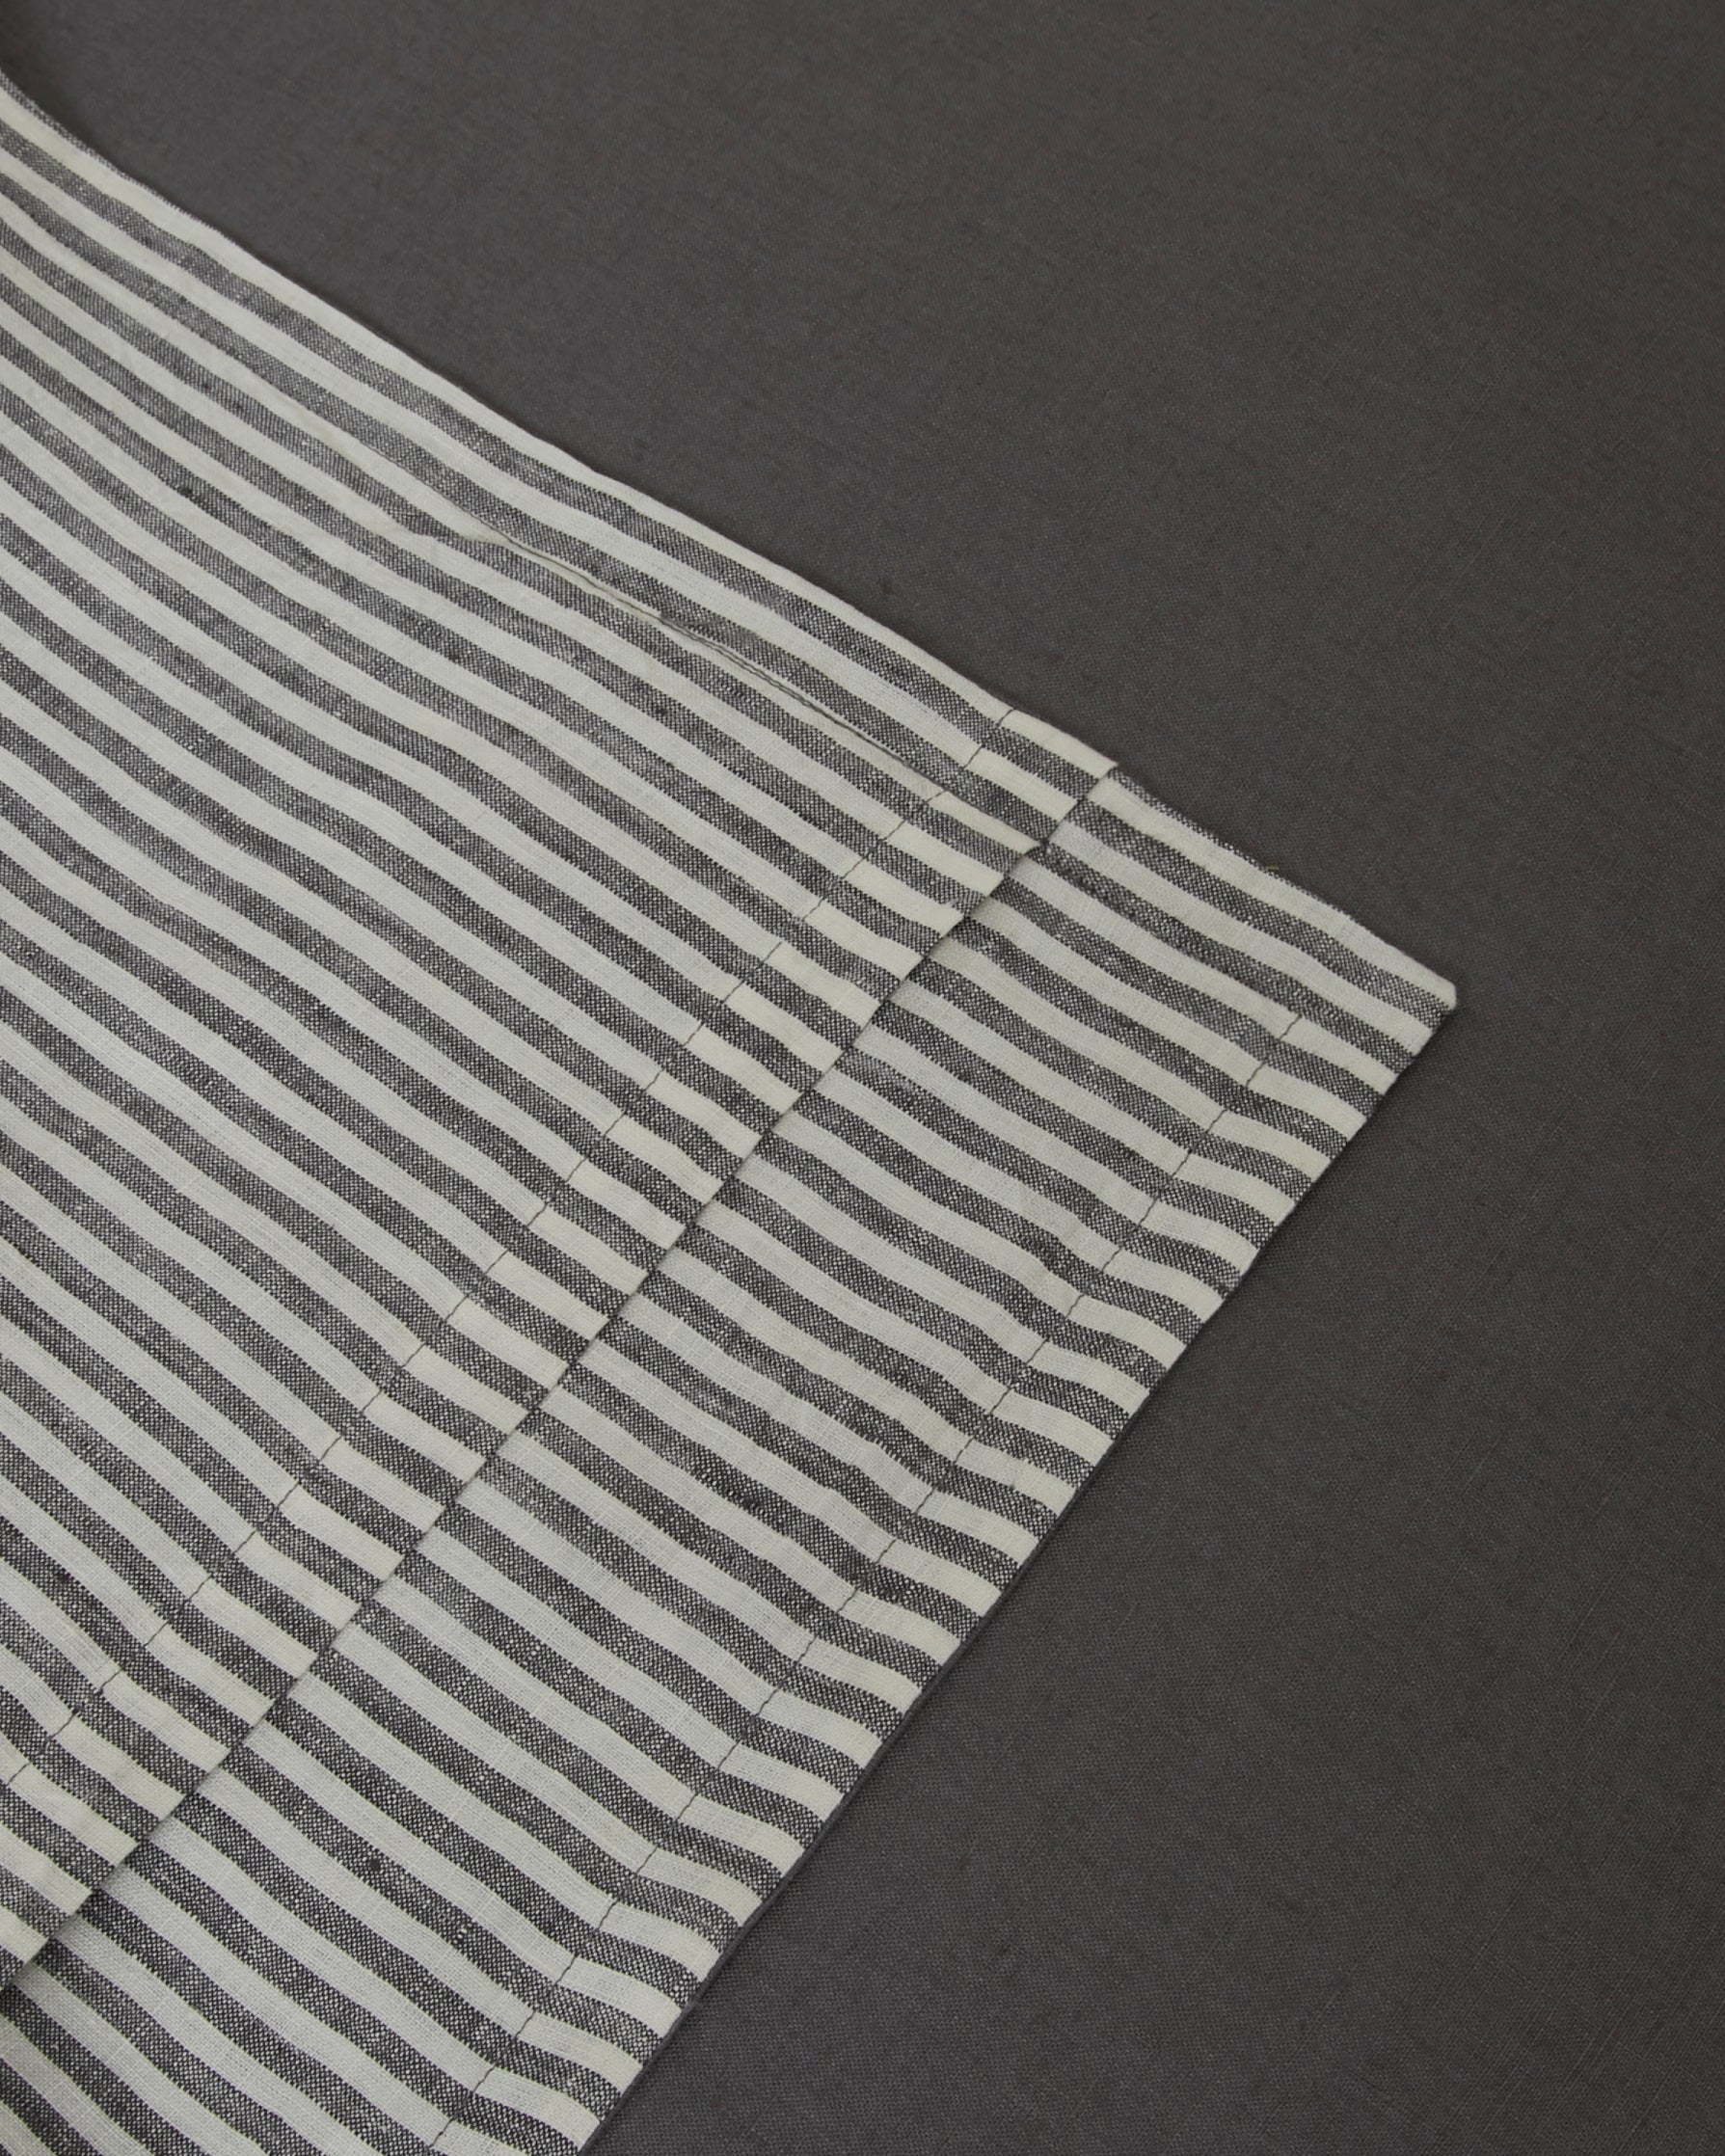 Linen sheets collection set in a dark gray storm color